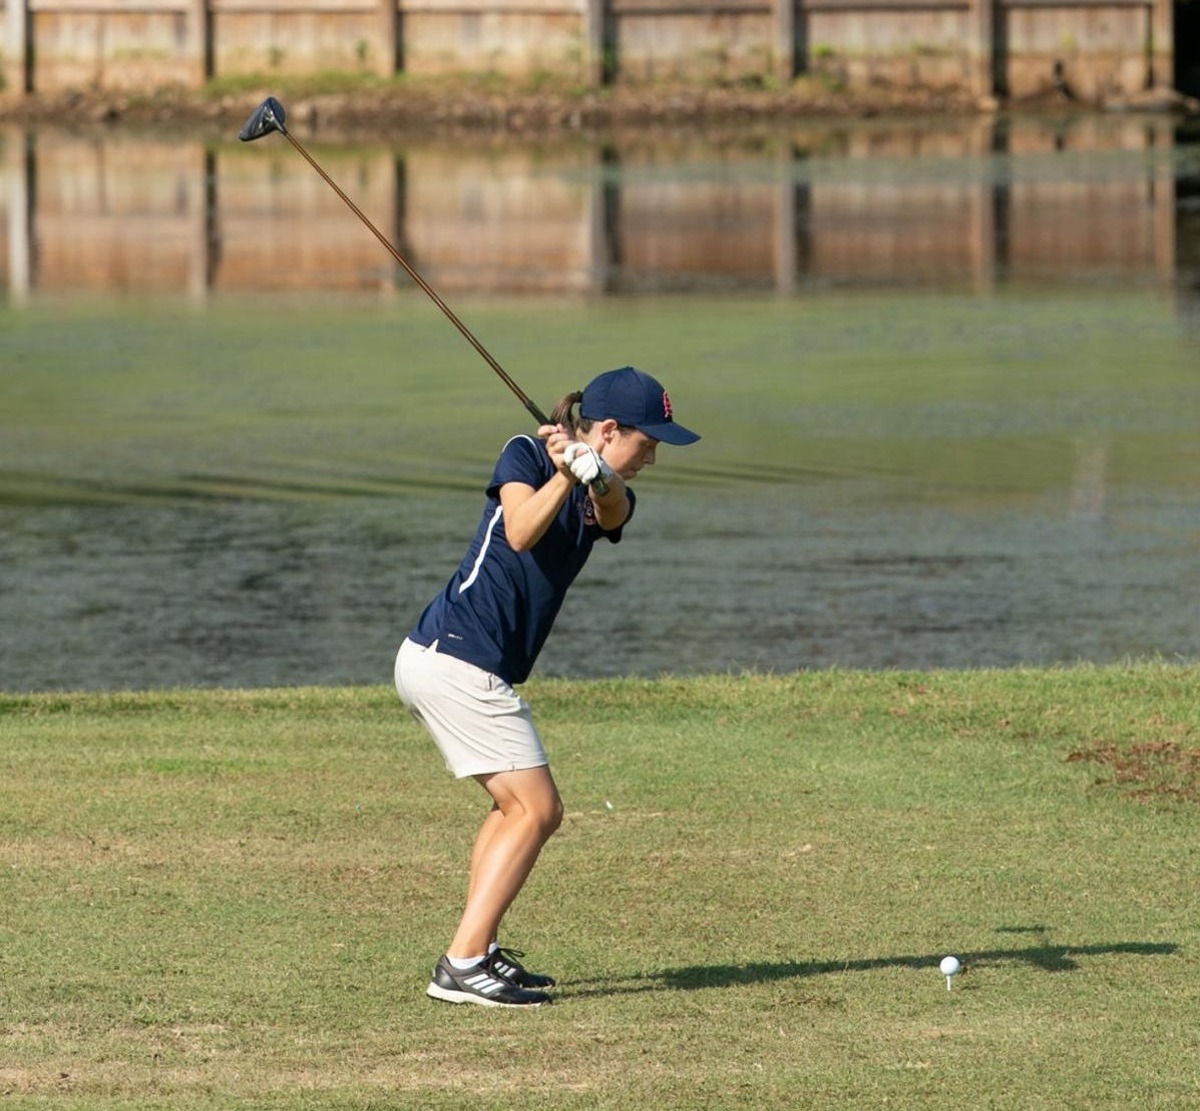 A golf team member lines up a ball on the golf course.